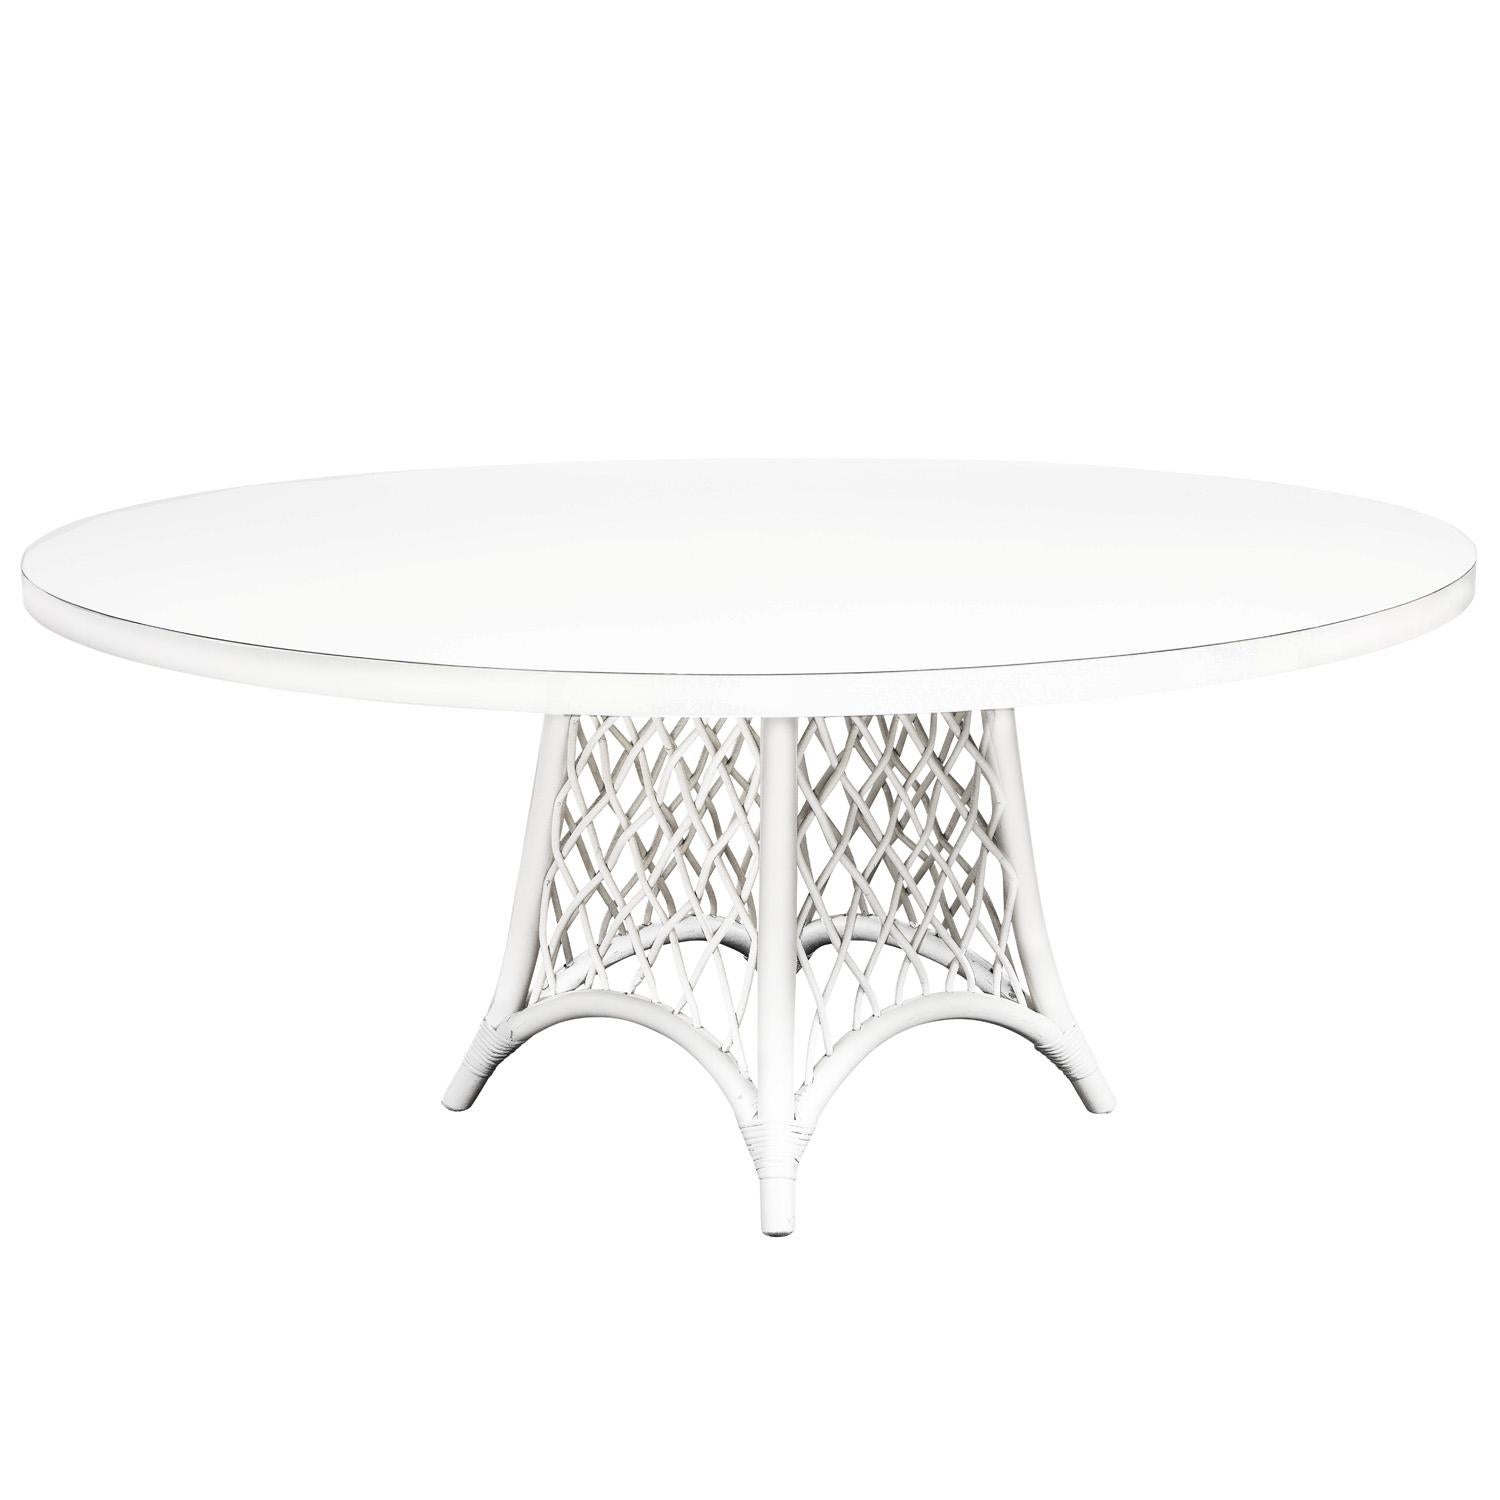 Elegant white lacquered dining table base with splaying legs,  white laminate top and criss-cross design base by Henry Olko for Willow and Reed, American 1950’s.  Willow and Reed designed furniture ideal for enclosed porches or outdoor areas not